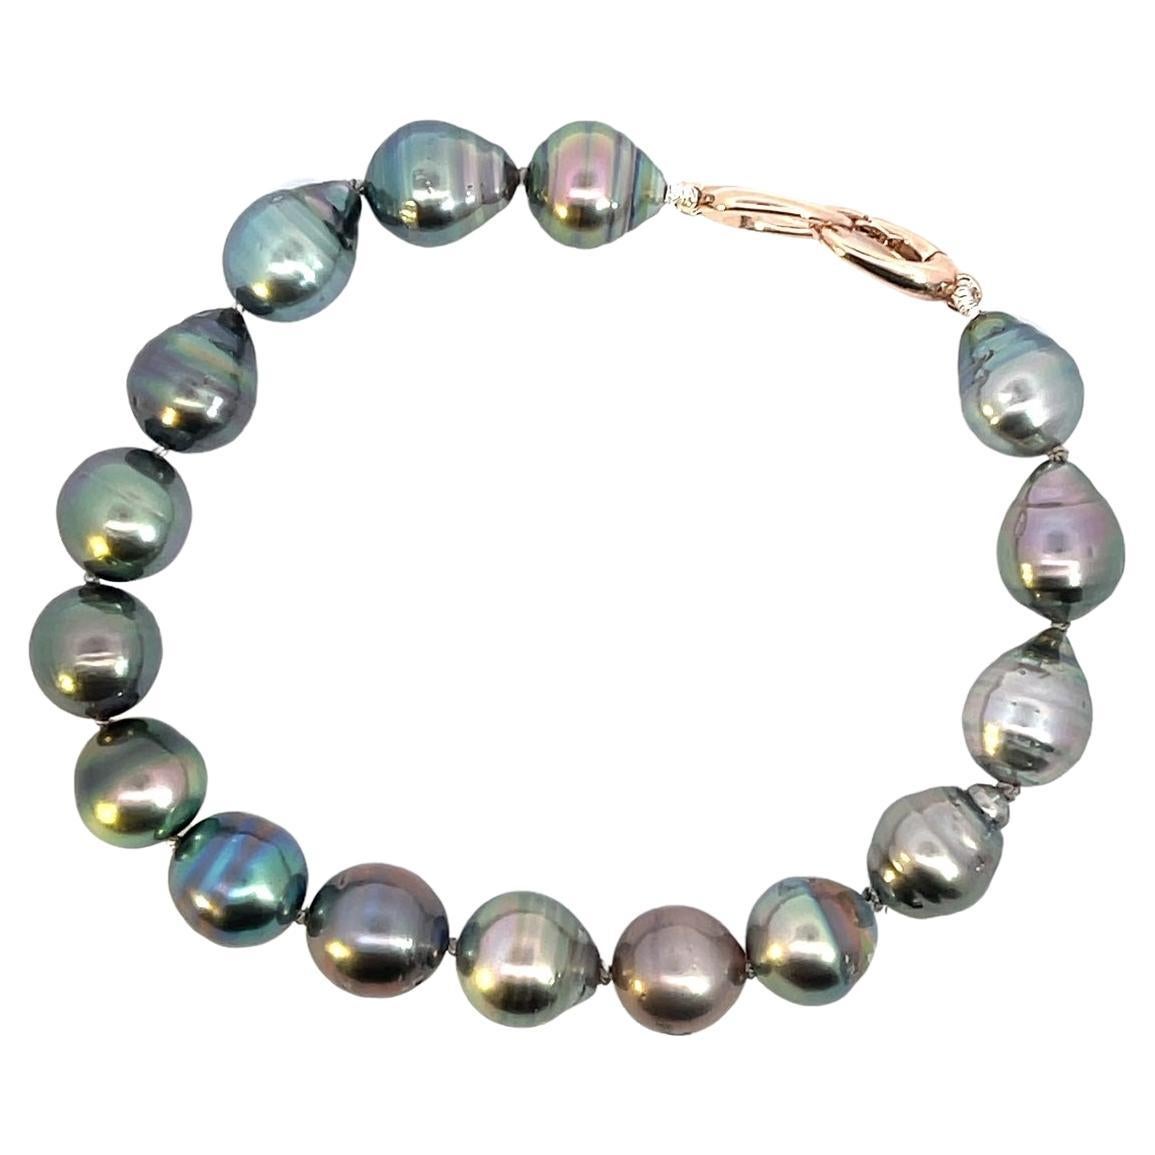 Knotted Tahitian Pearl Bracelet with 14k Rose Gold Triggerless Clasp For Sale